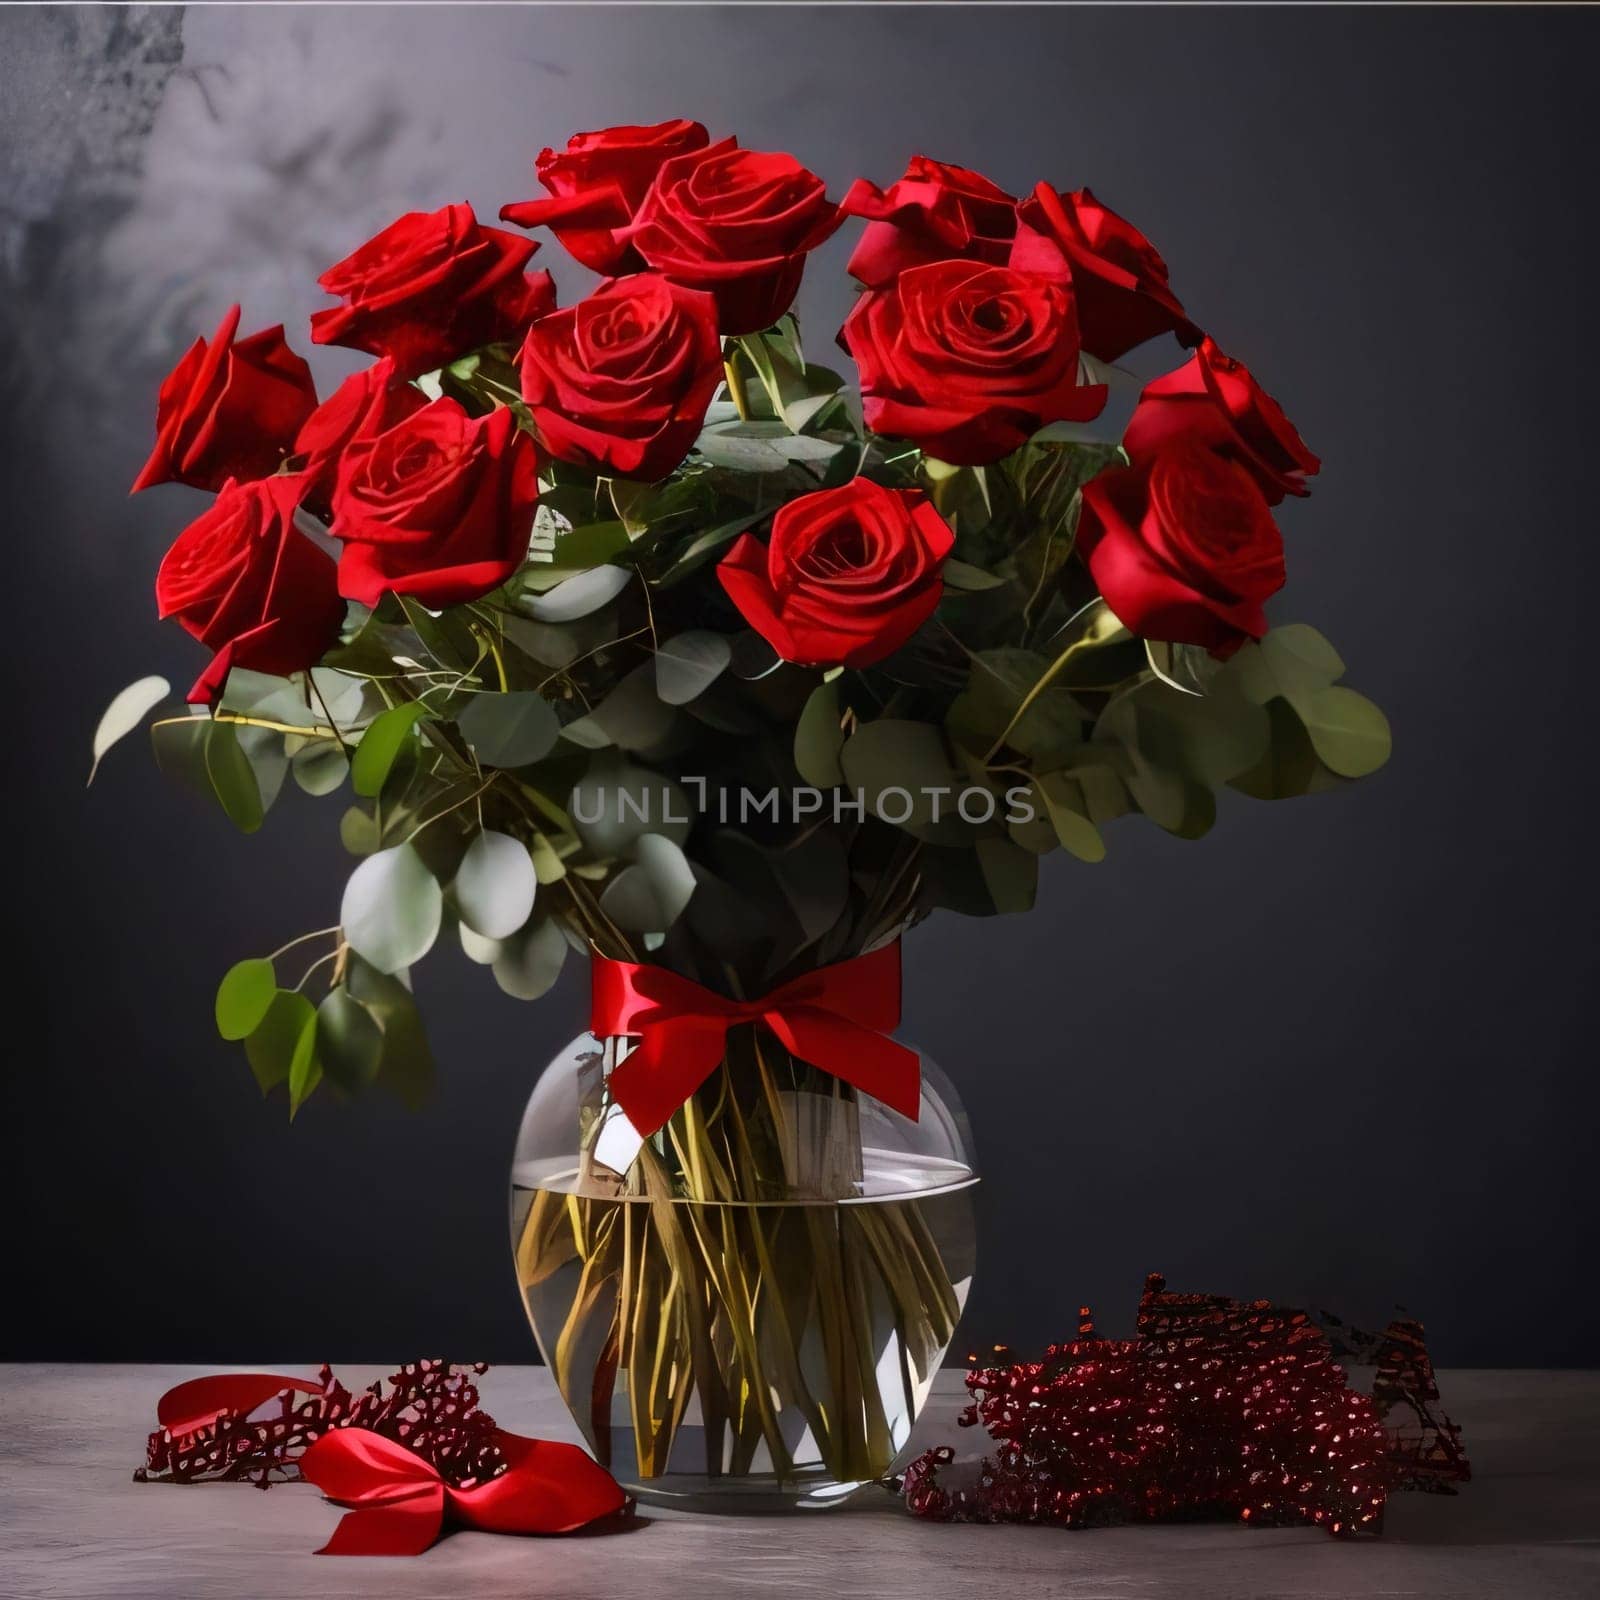 Bouquets of red roses with a red bow in a transparent vase, dark background. Flowering flowers, a symbol of spring, new life. A joyful time of nature waking up to life.